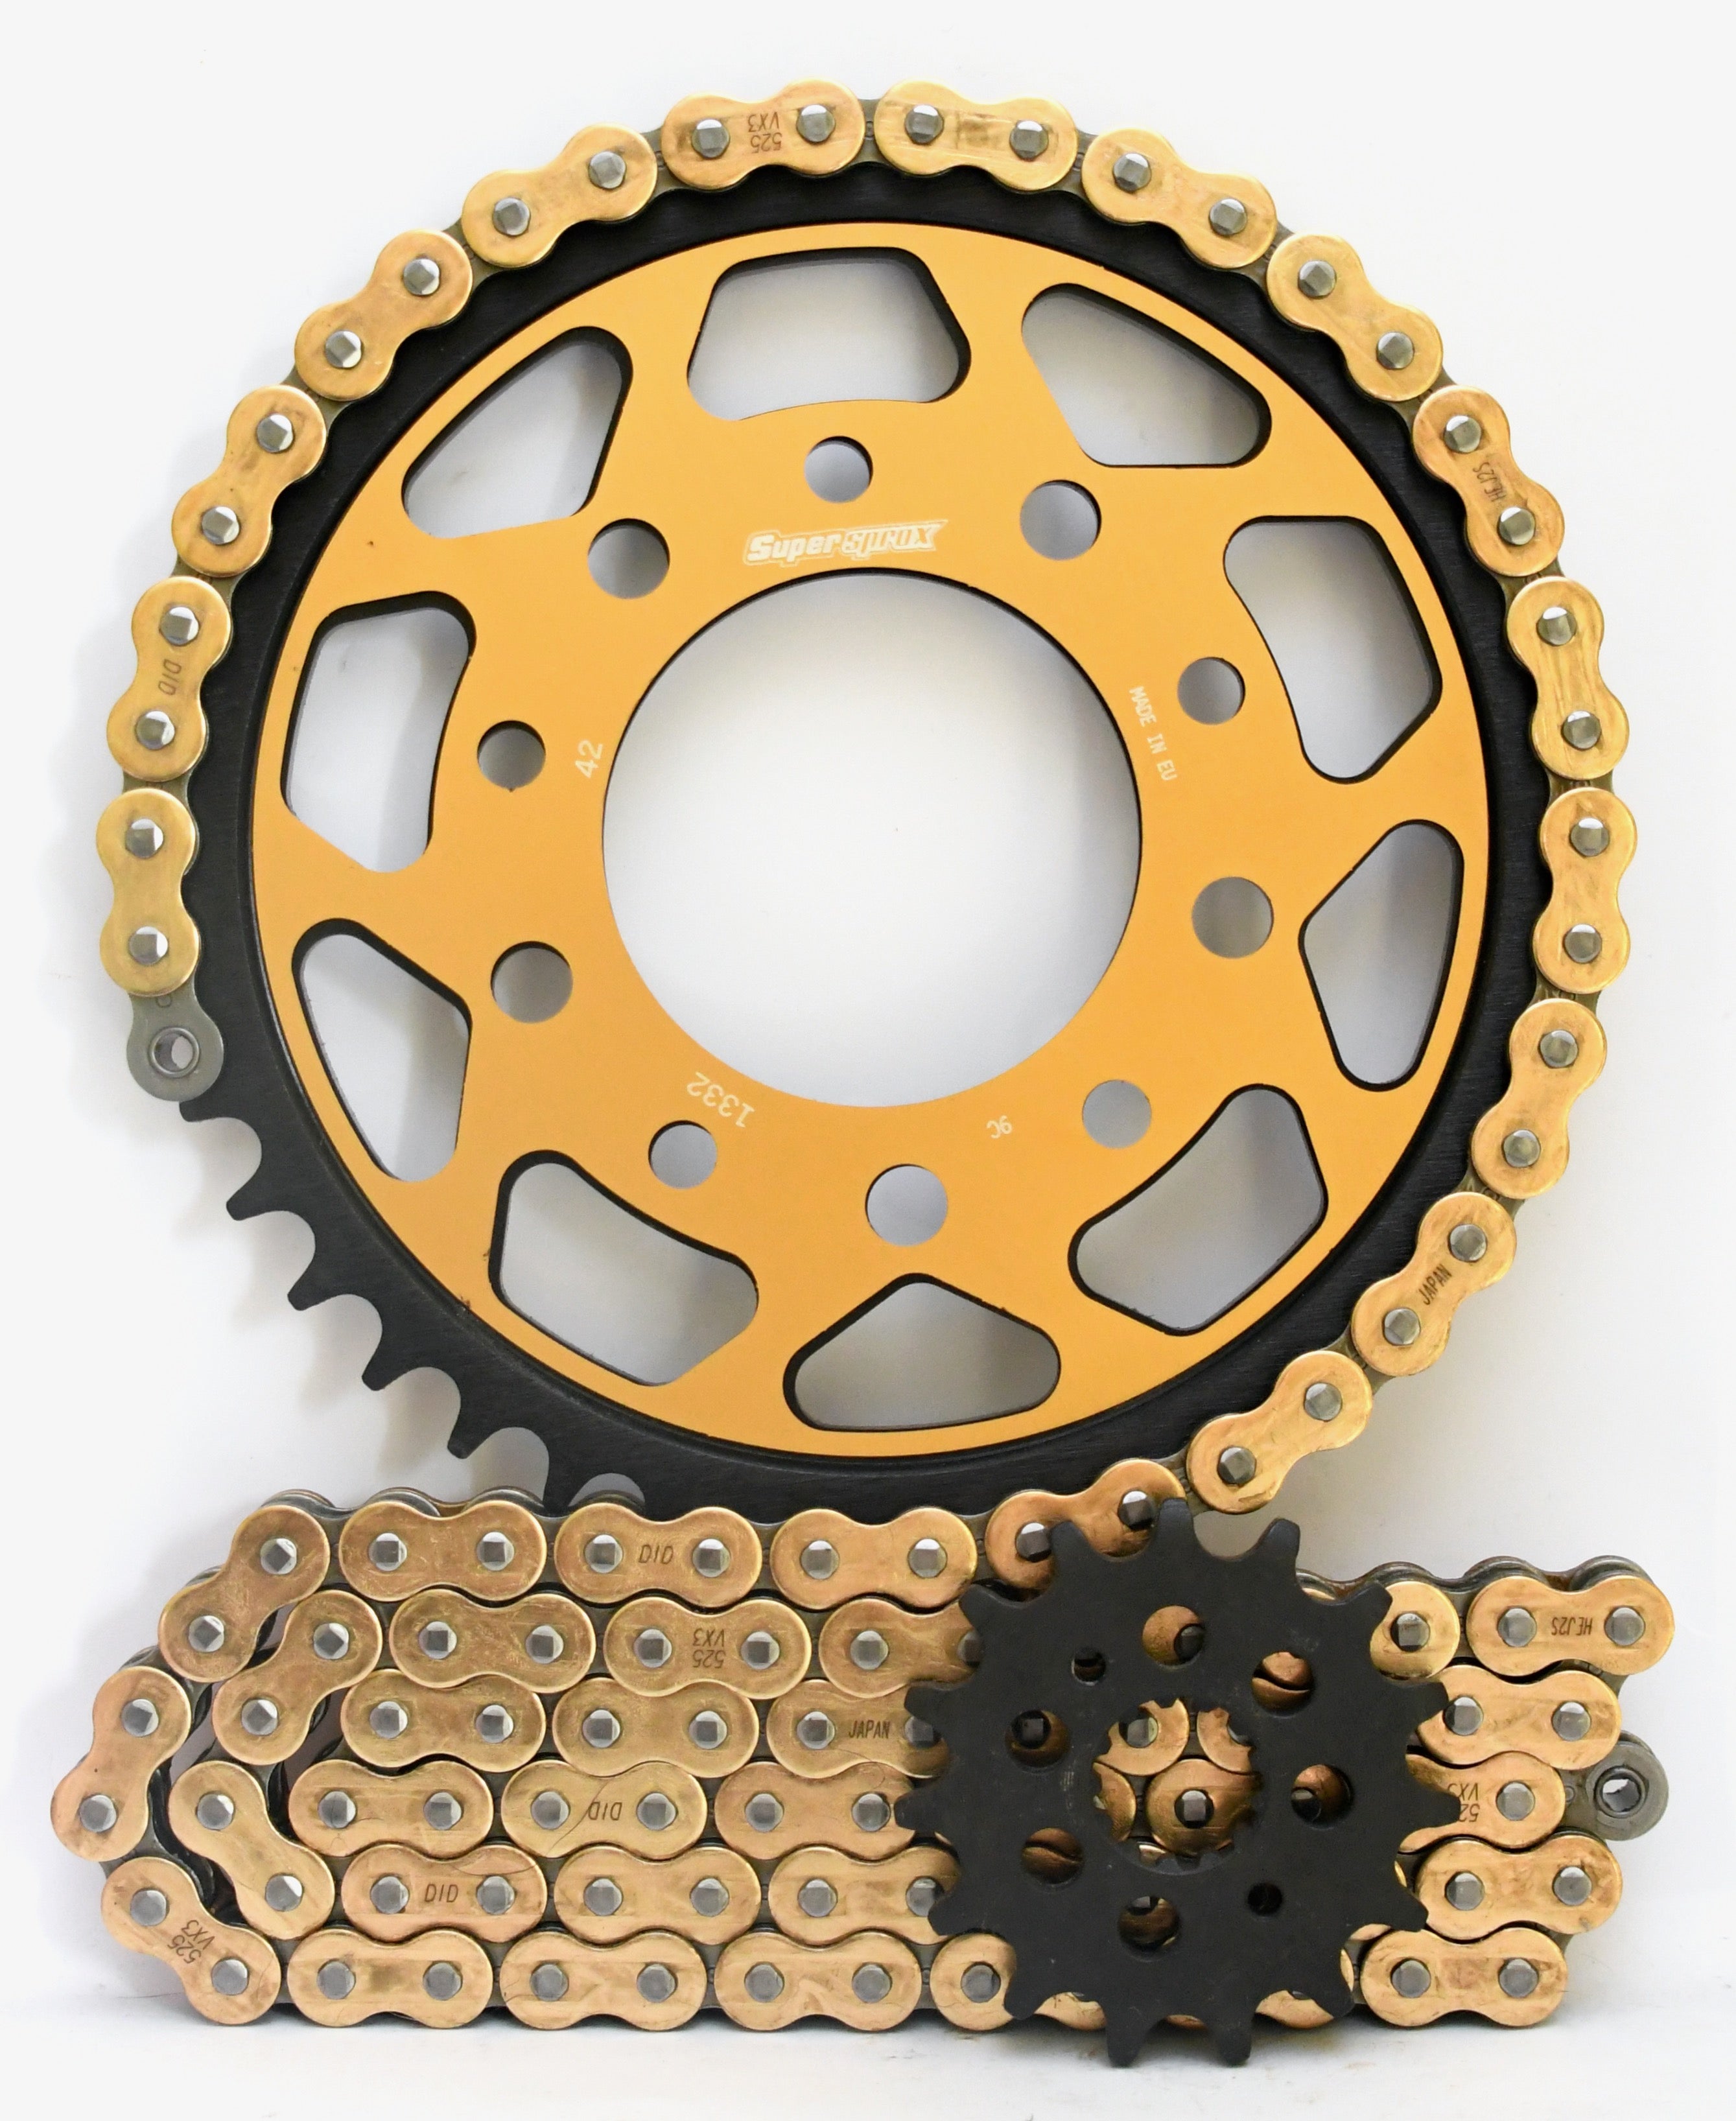 Supersprox Steel Edge Chain & Sprocket Kit for Triumph America 865 2007-2014 - Standard Gearing - 0